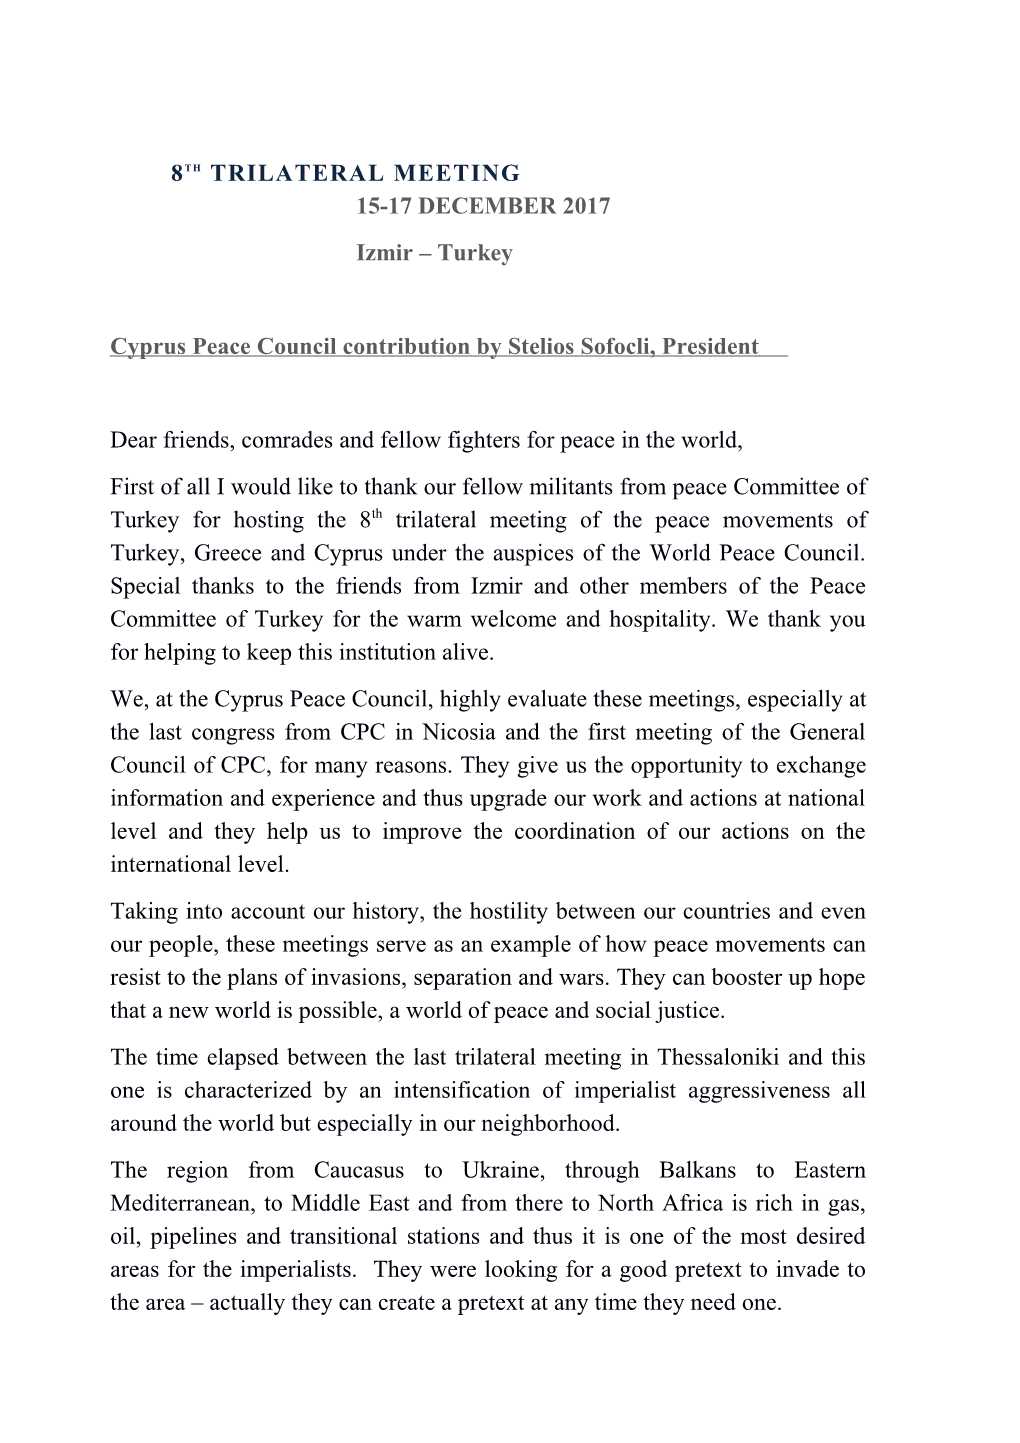 Cyprus Peace Council Contribution Bystelios Sofocli, President